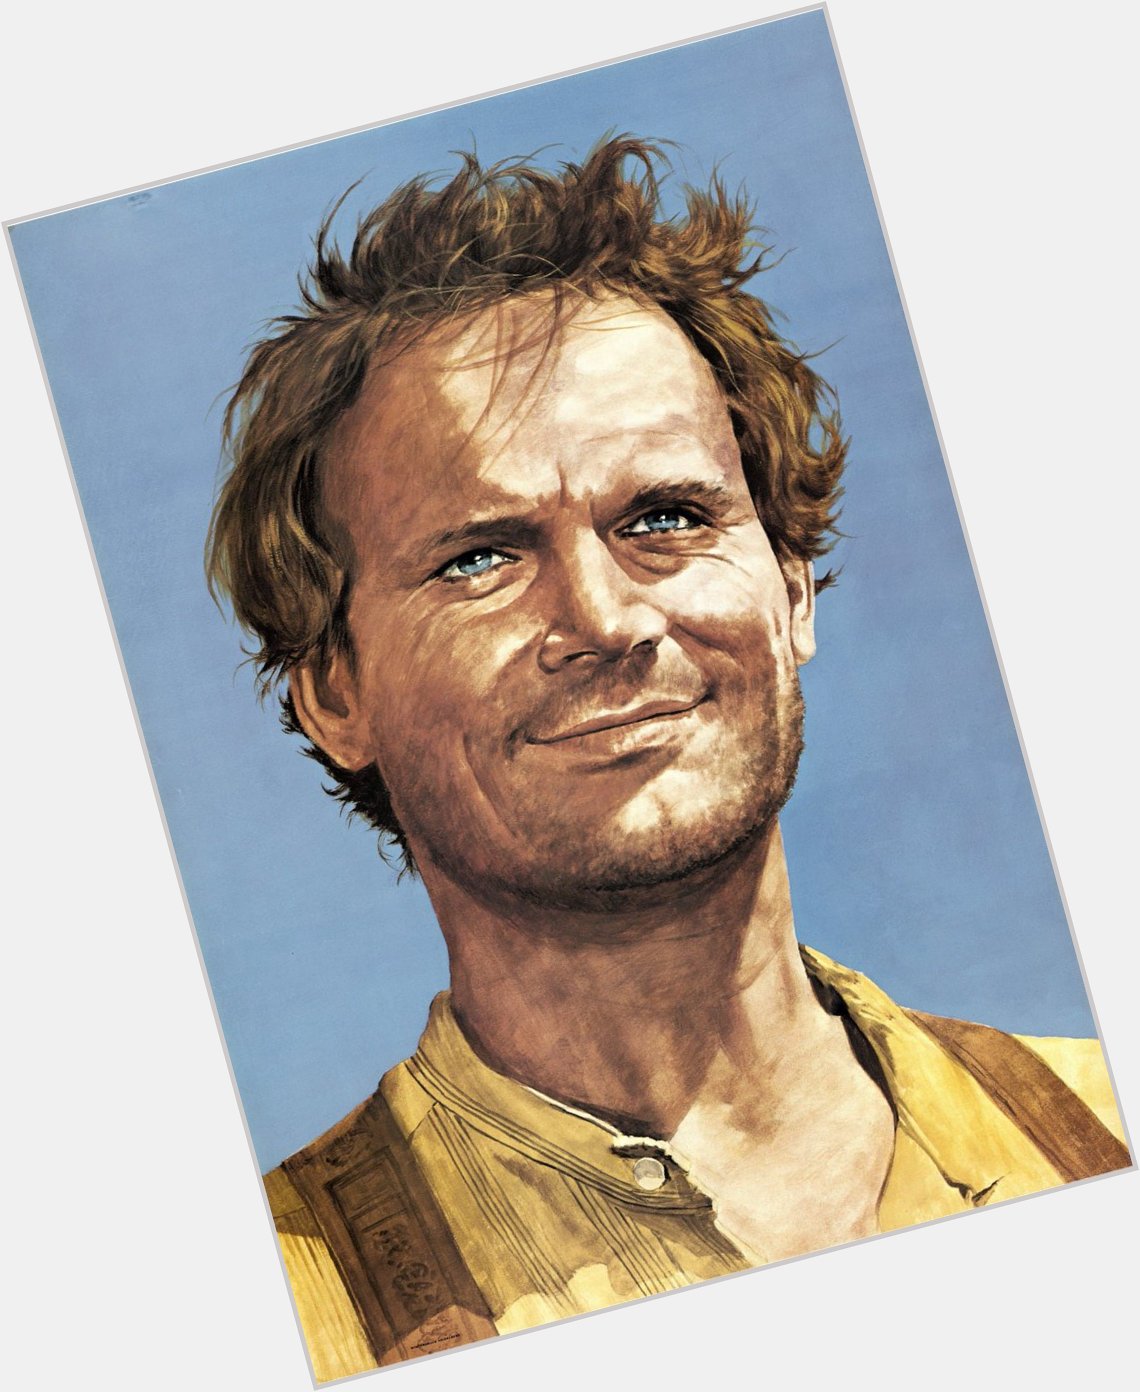 Happy 80th Birthday, Terence Hill!  